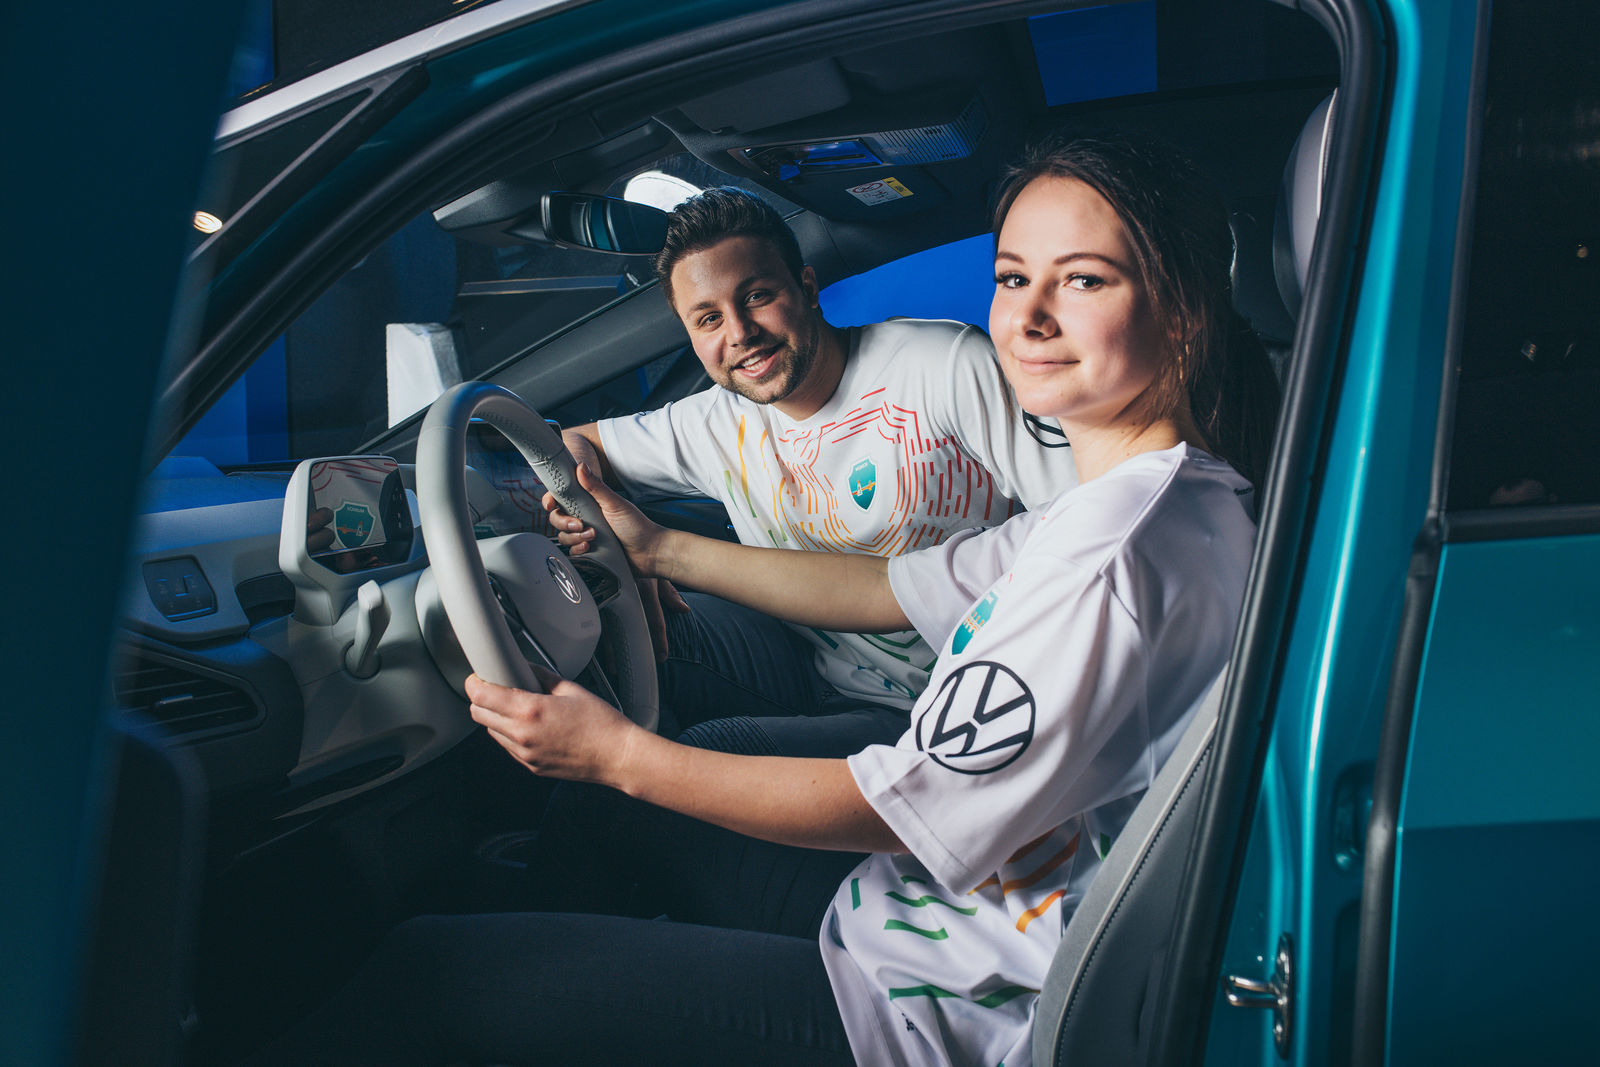 Volkswagen mobilizes fans at the UEFA EURO 2020™: Shirt is also ticket for e-scooters, bicycles and more